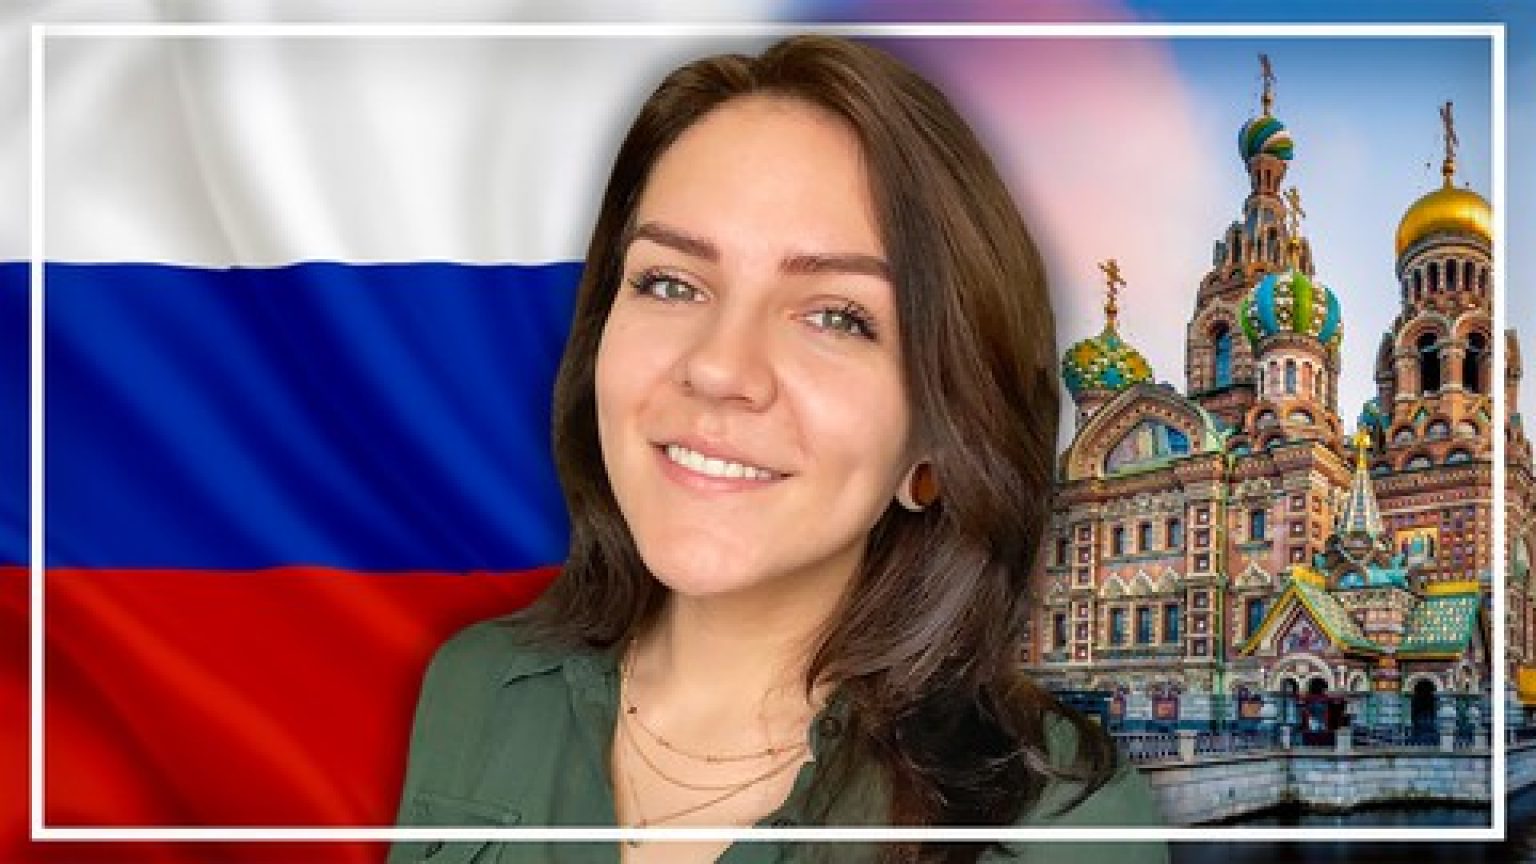 [100OFF] Complete Russian Course Learn Russian for Beginners